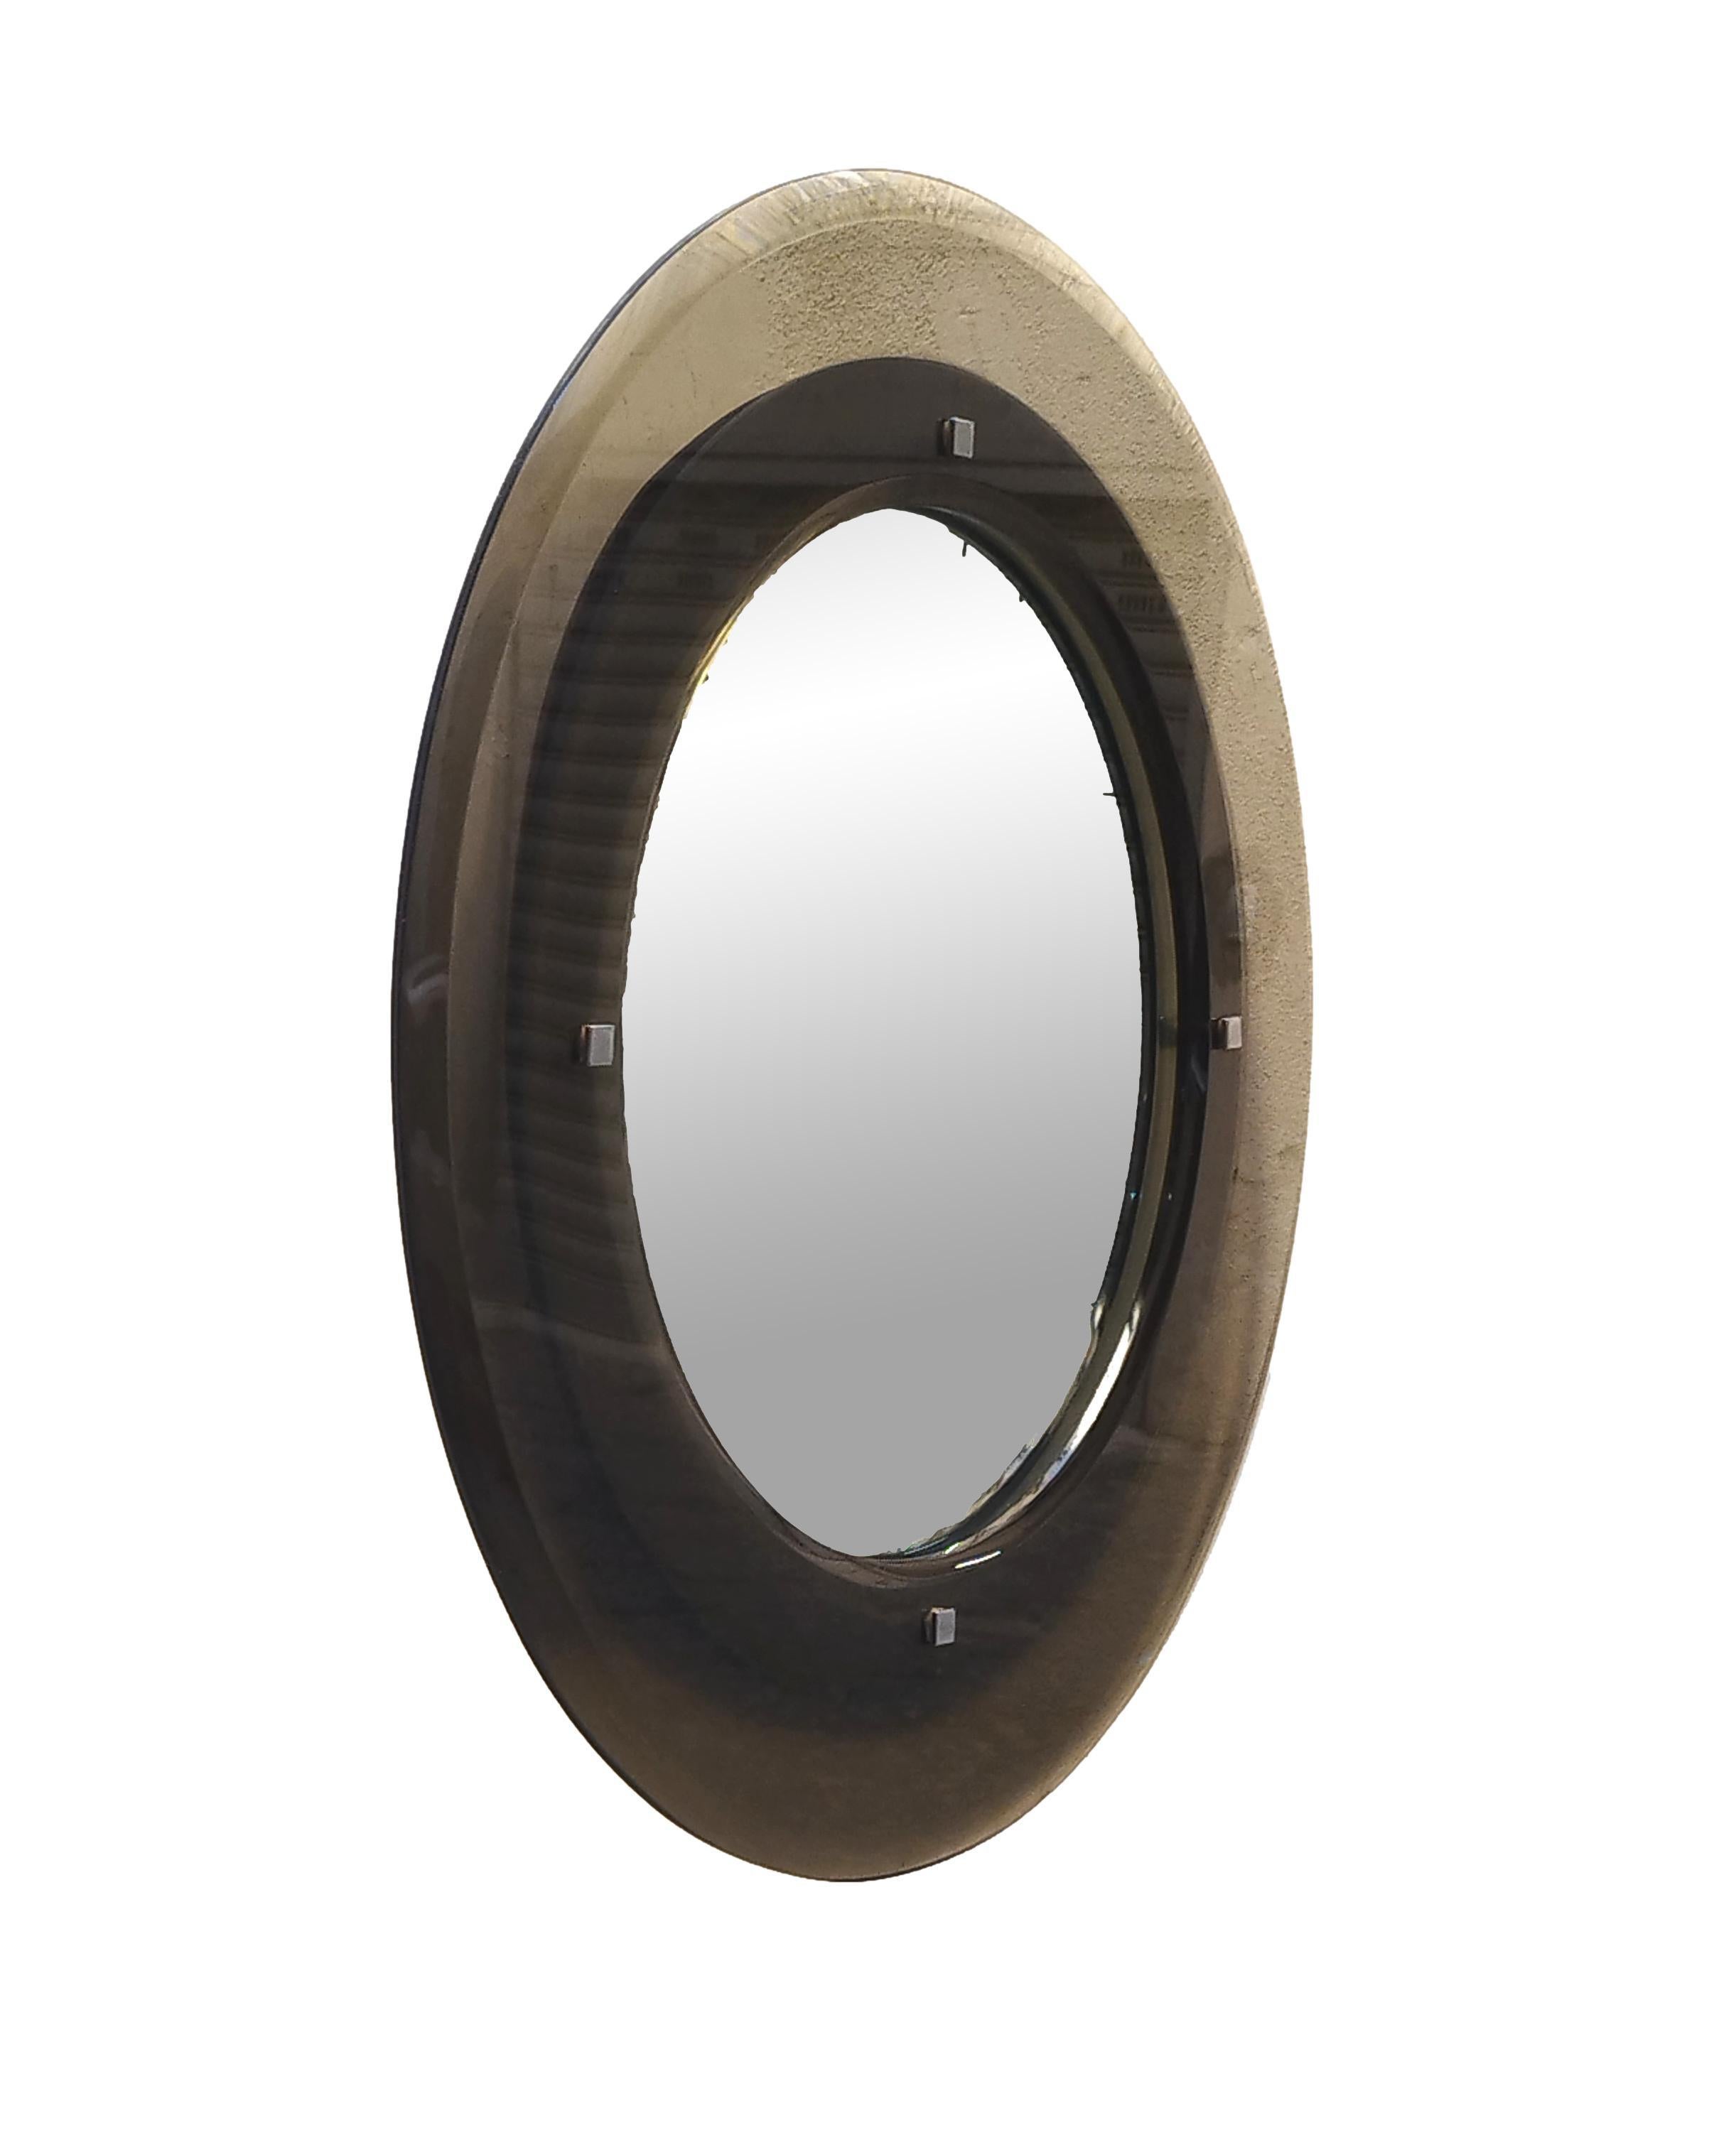 Gorgeous circular wall mirror made of mirrored glass , chrome metal hooks and with beveled and beveled glass frame in warm and dark smoky dove-colored crystal glass by Cristal Art.